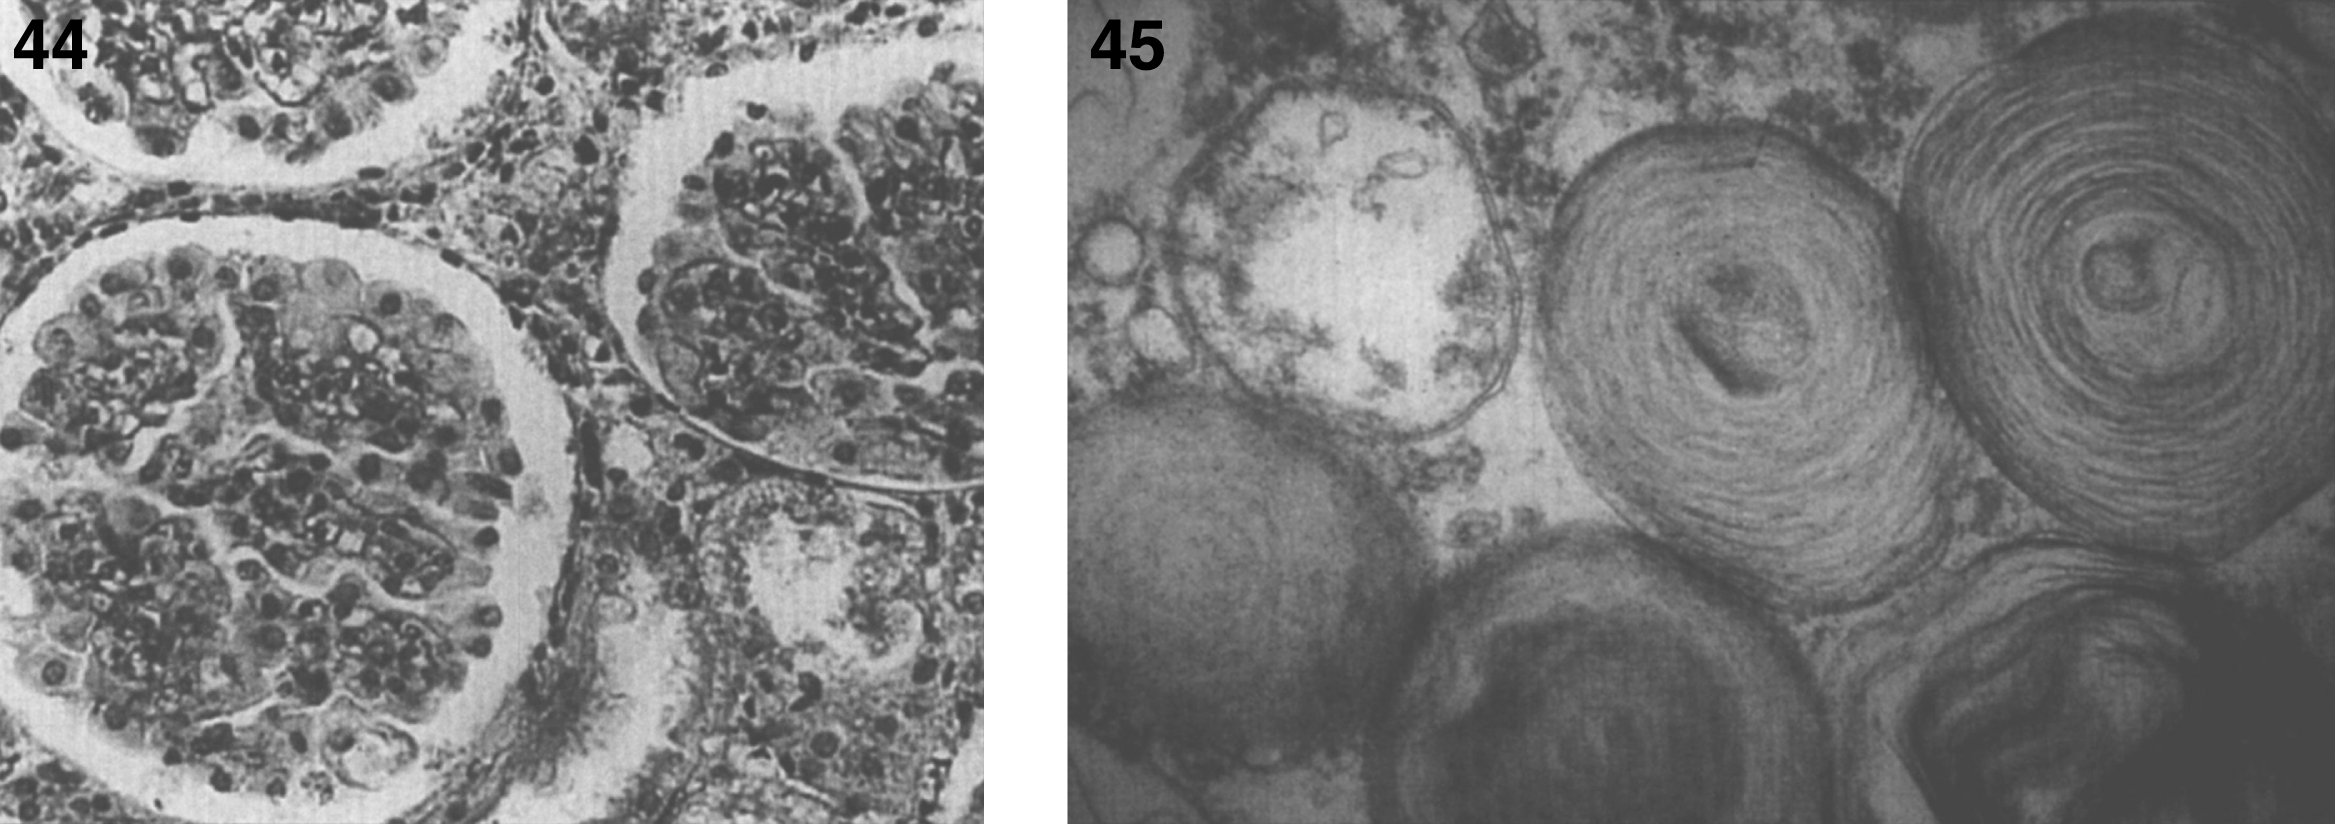 GM1 gangliosidosis type I: kidney. The glomerular epithelial cells are vacuolated; (45) GM1 gangliosidosis type I. Electron micrograph in conjunctival biopsy showing typical membranous concentric bodies (MCBs) of gangliosides. MCBs are the morphologic expression of gangliosides seen in all the gangliosidoses including Tay-Sachs disease.